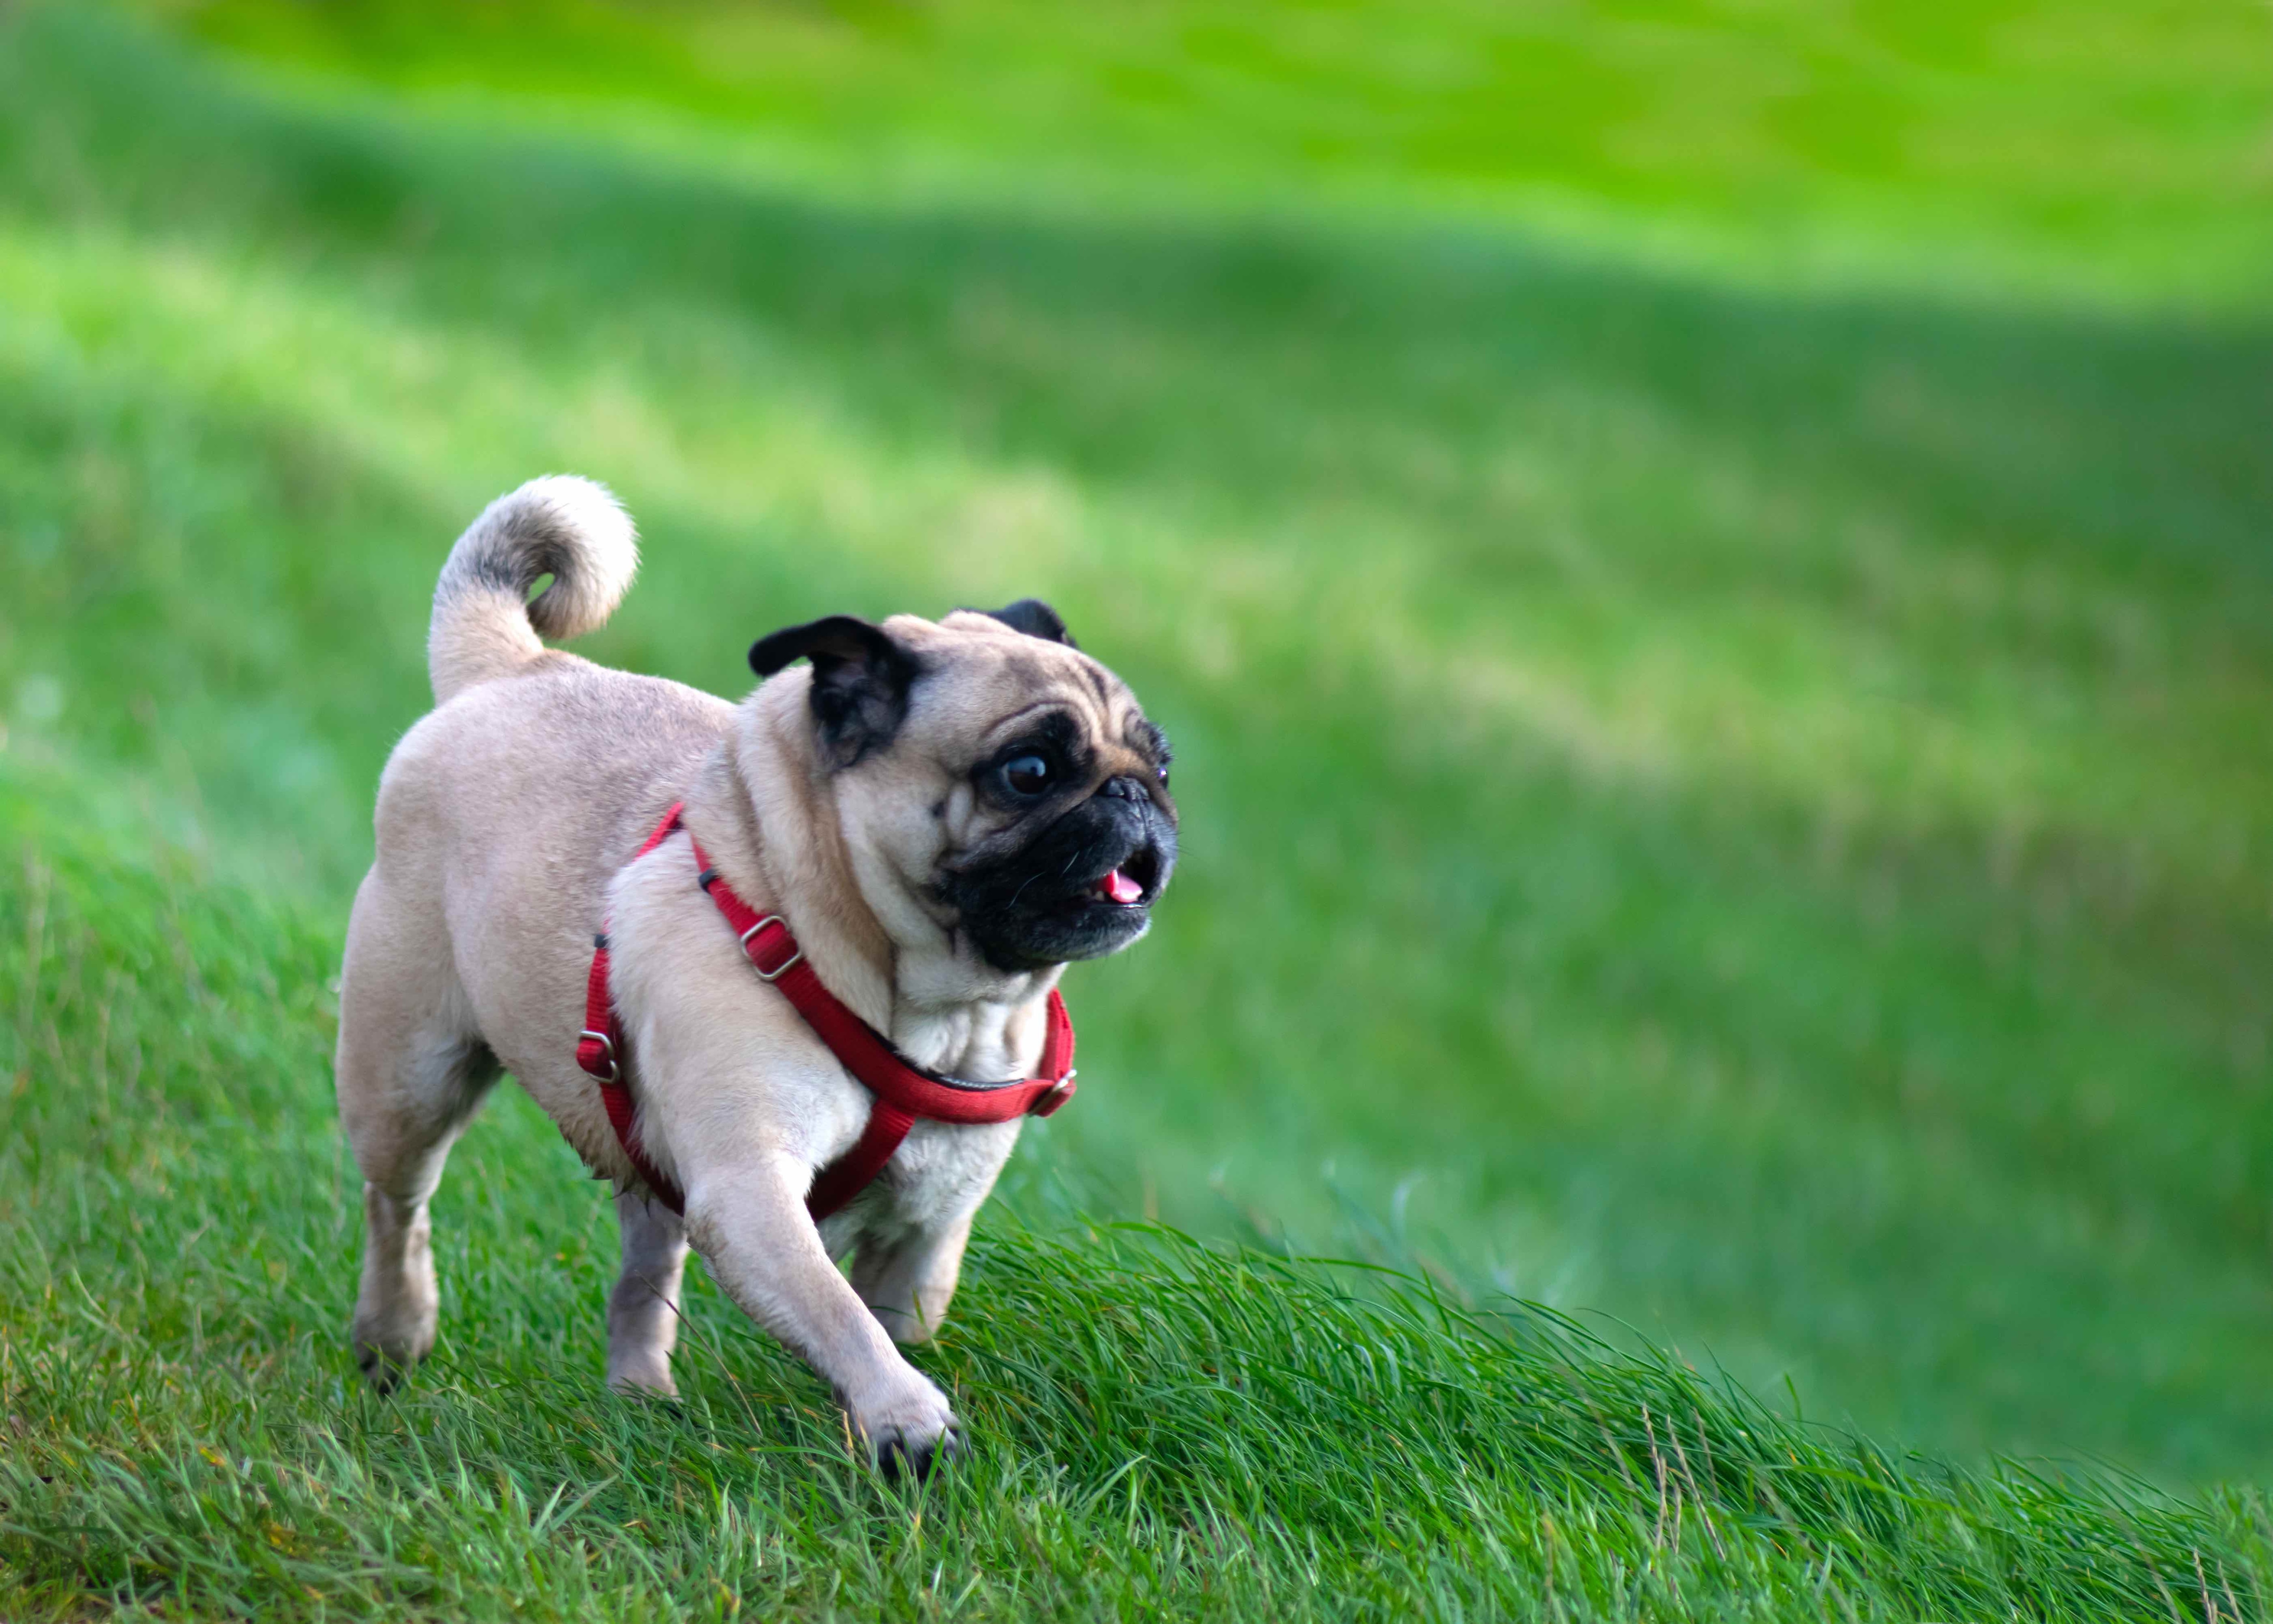 pug trotting through grass and wearing a harness